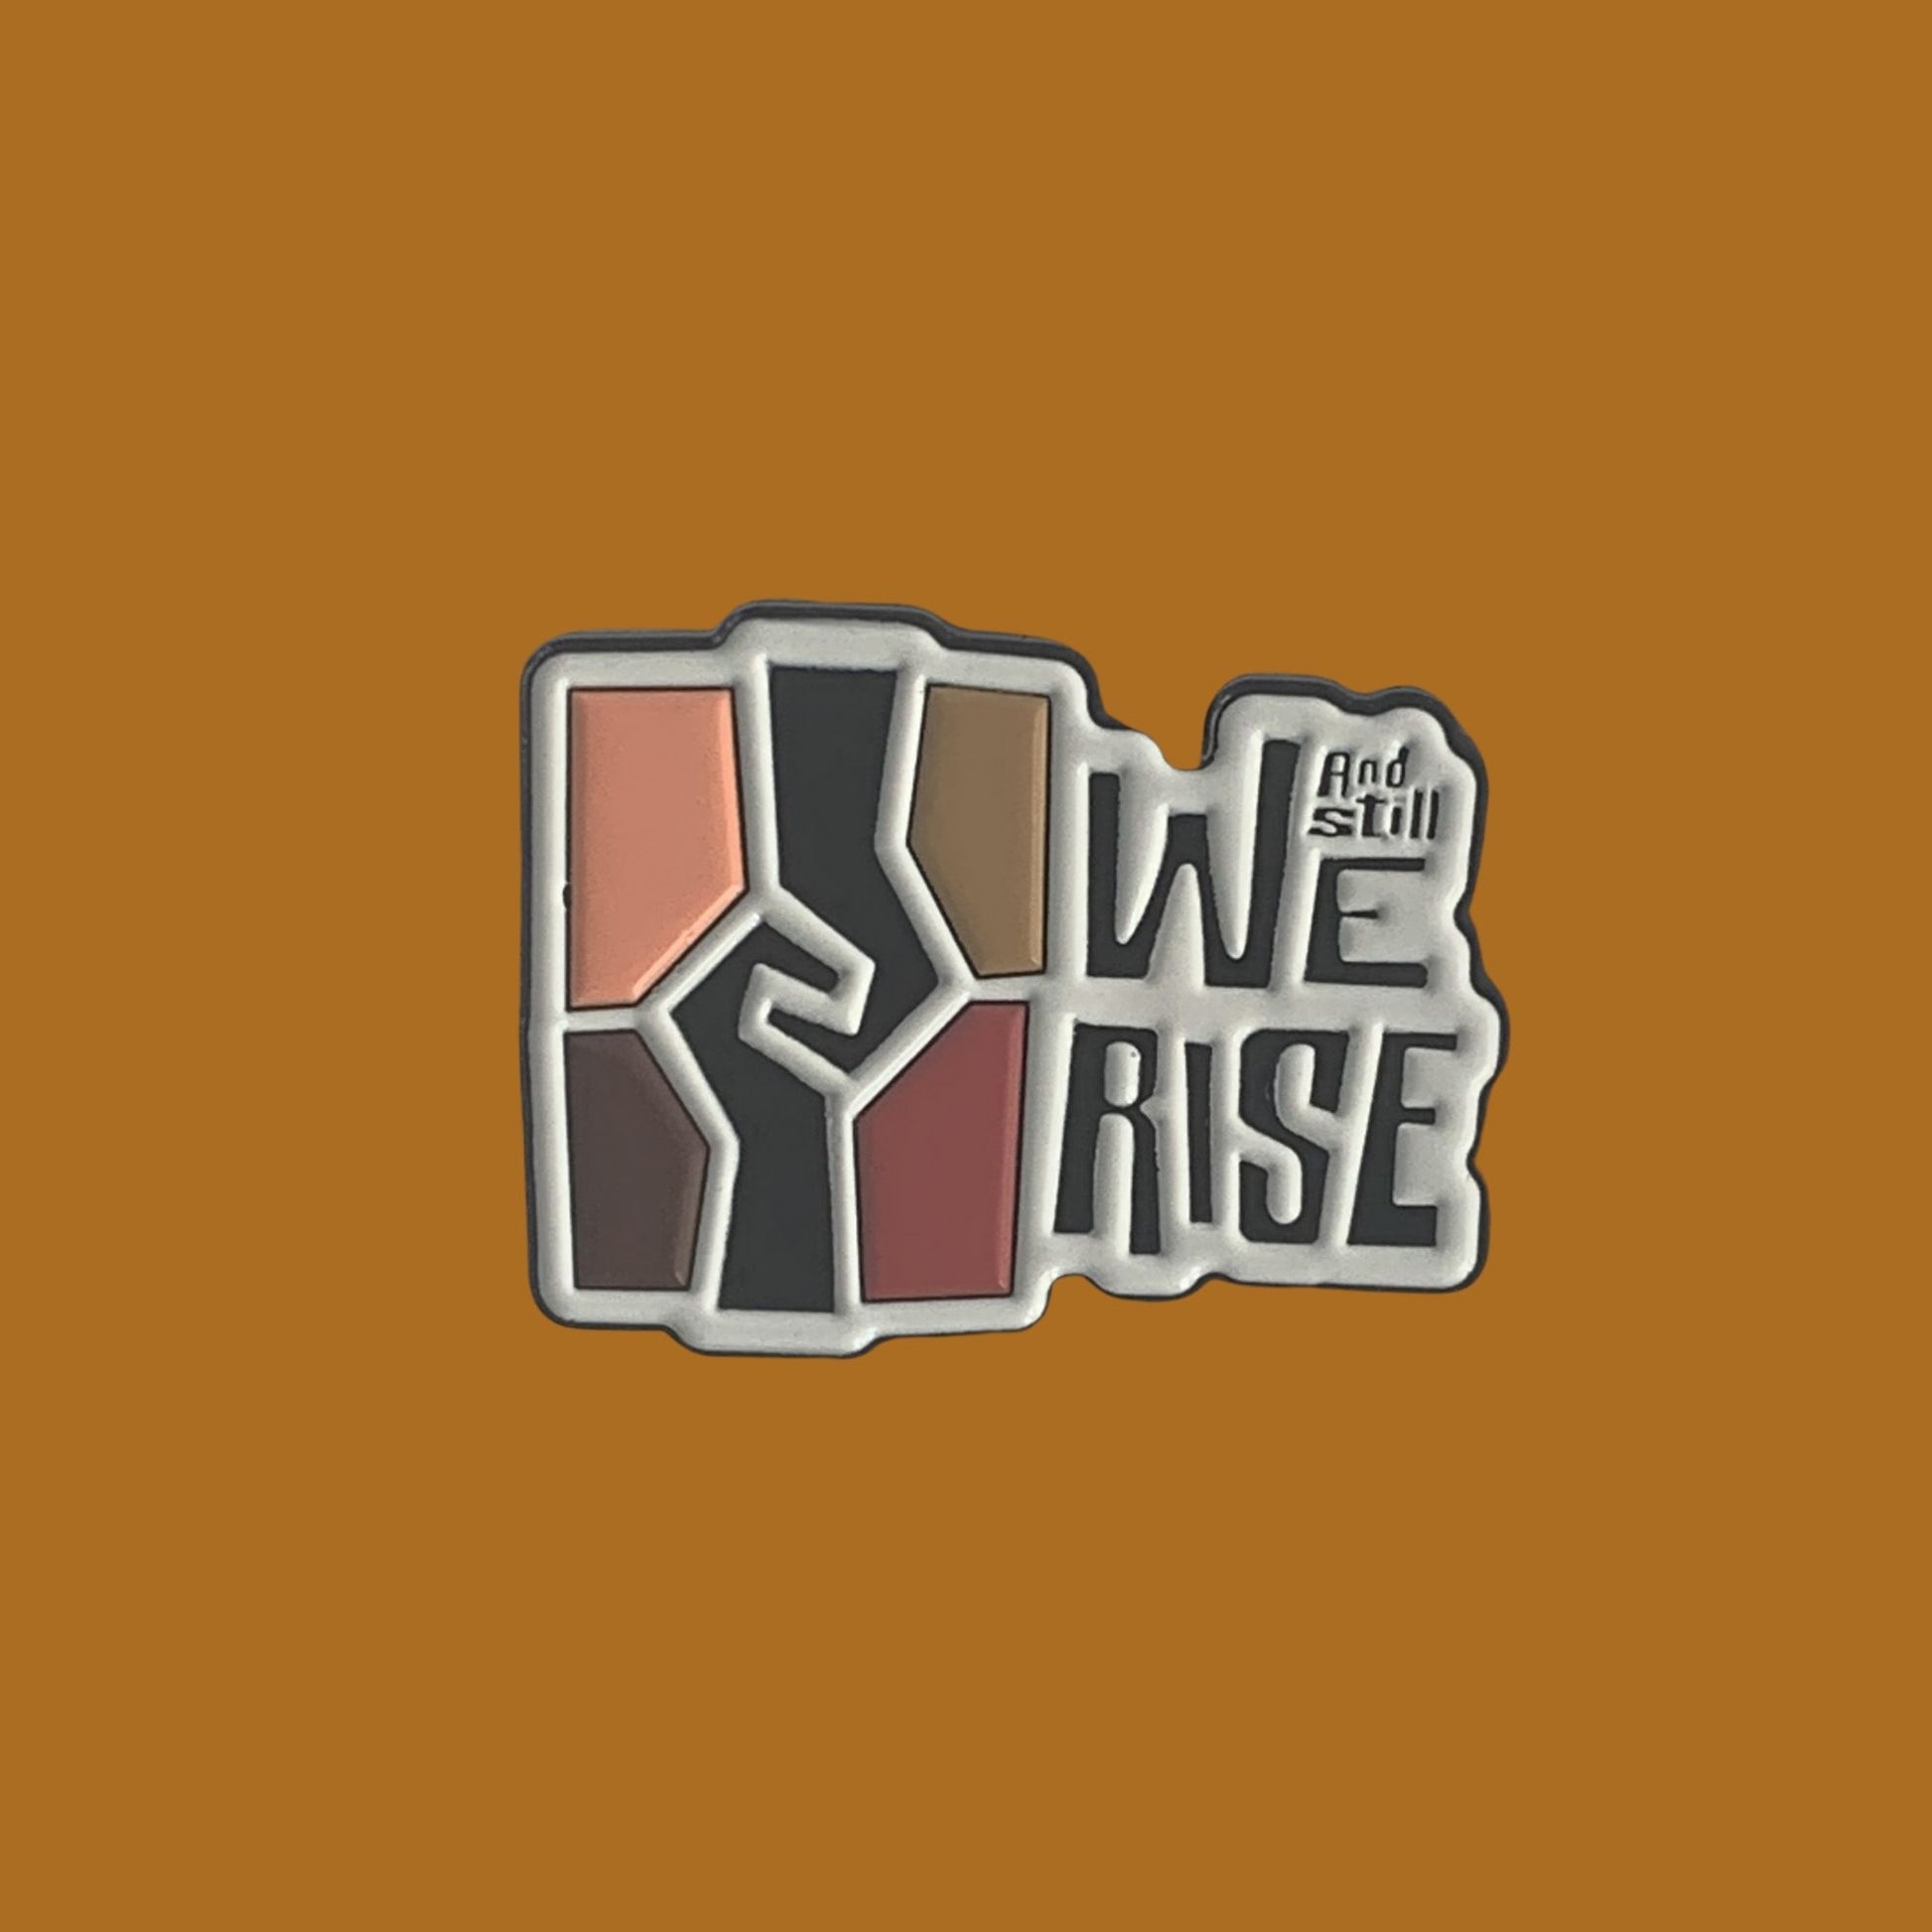 1.25 inch soft enamel lapel pin with the Ad Still We rise exhibition logo.